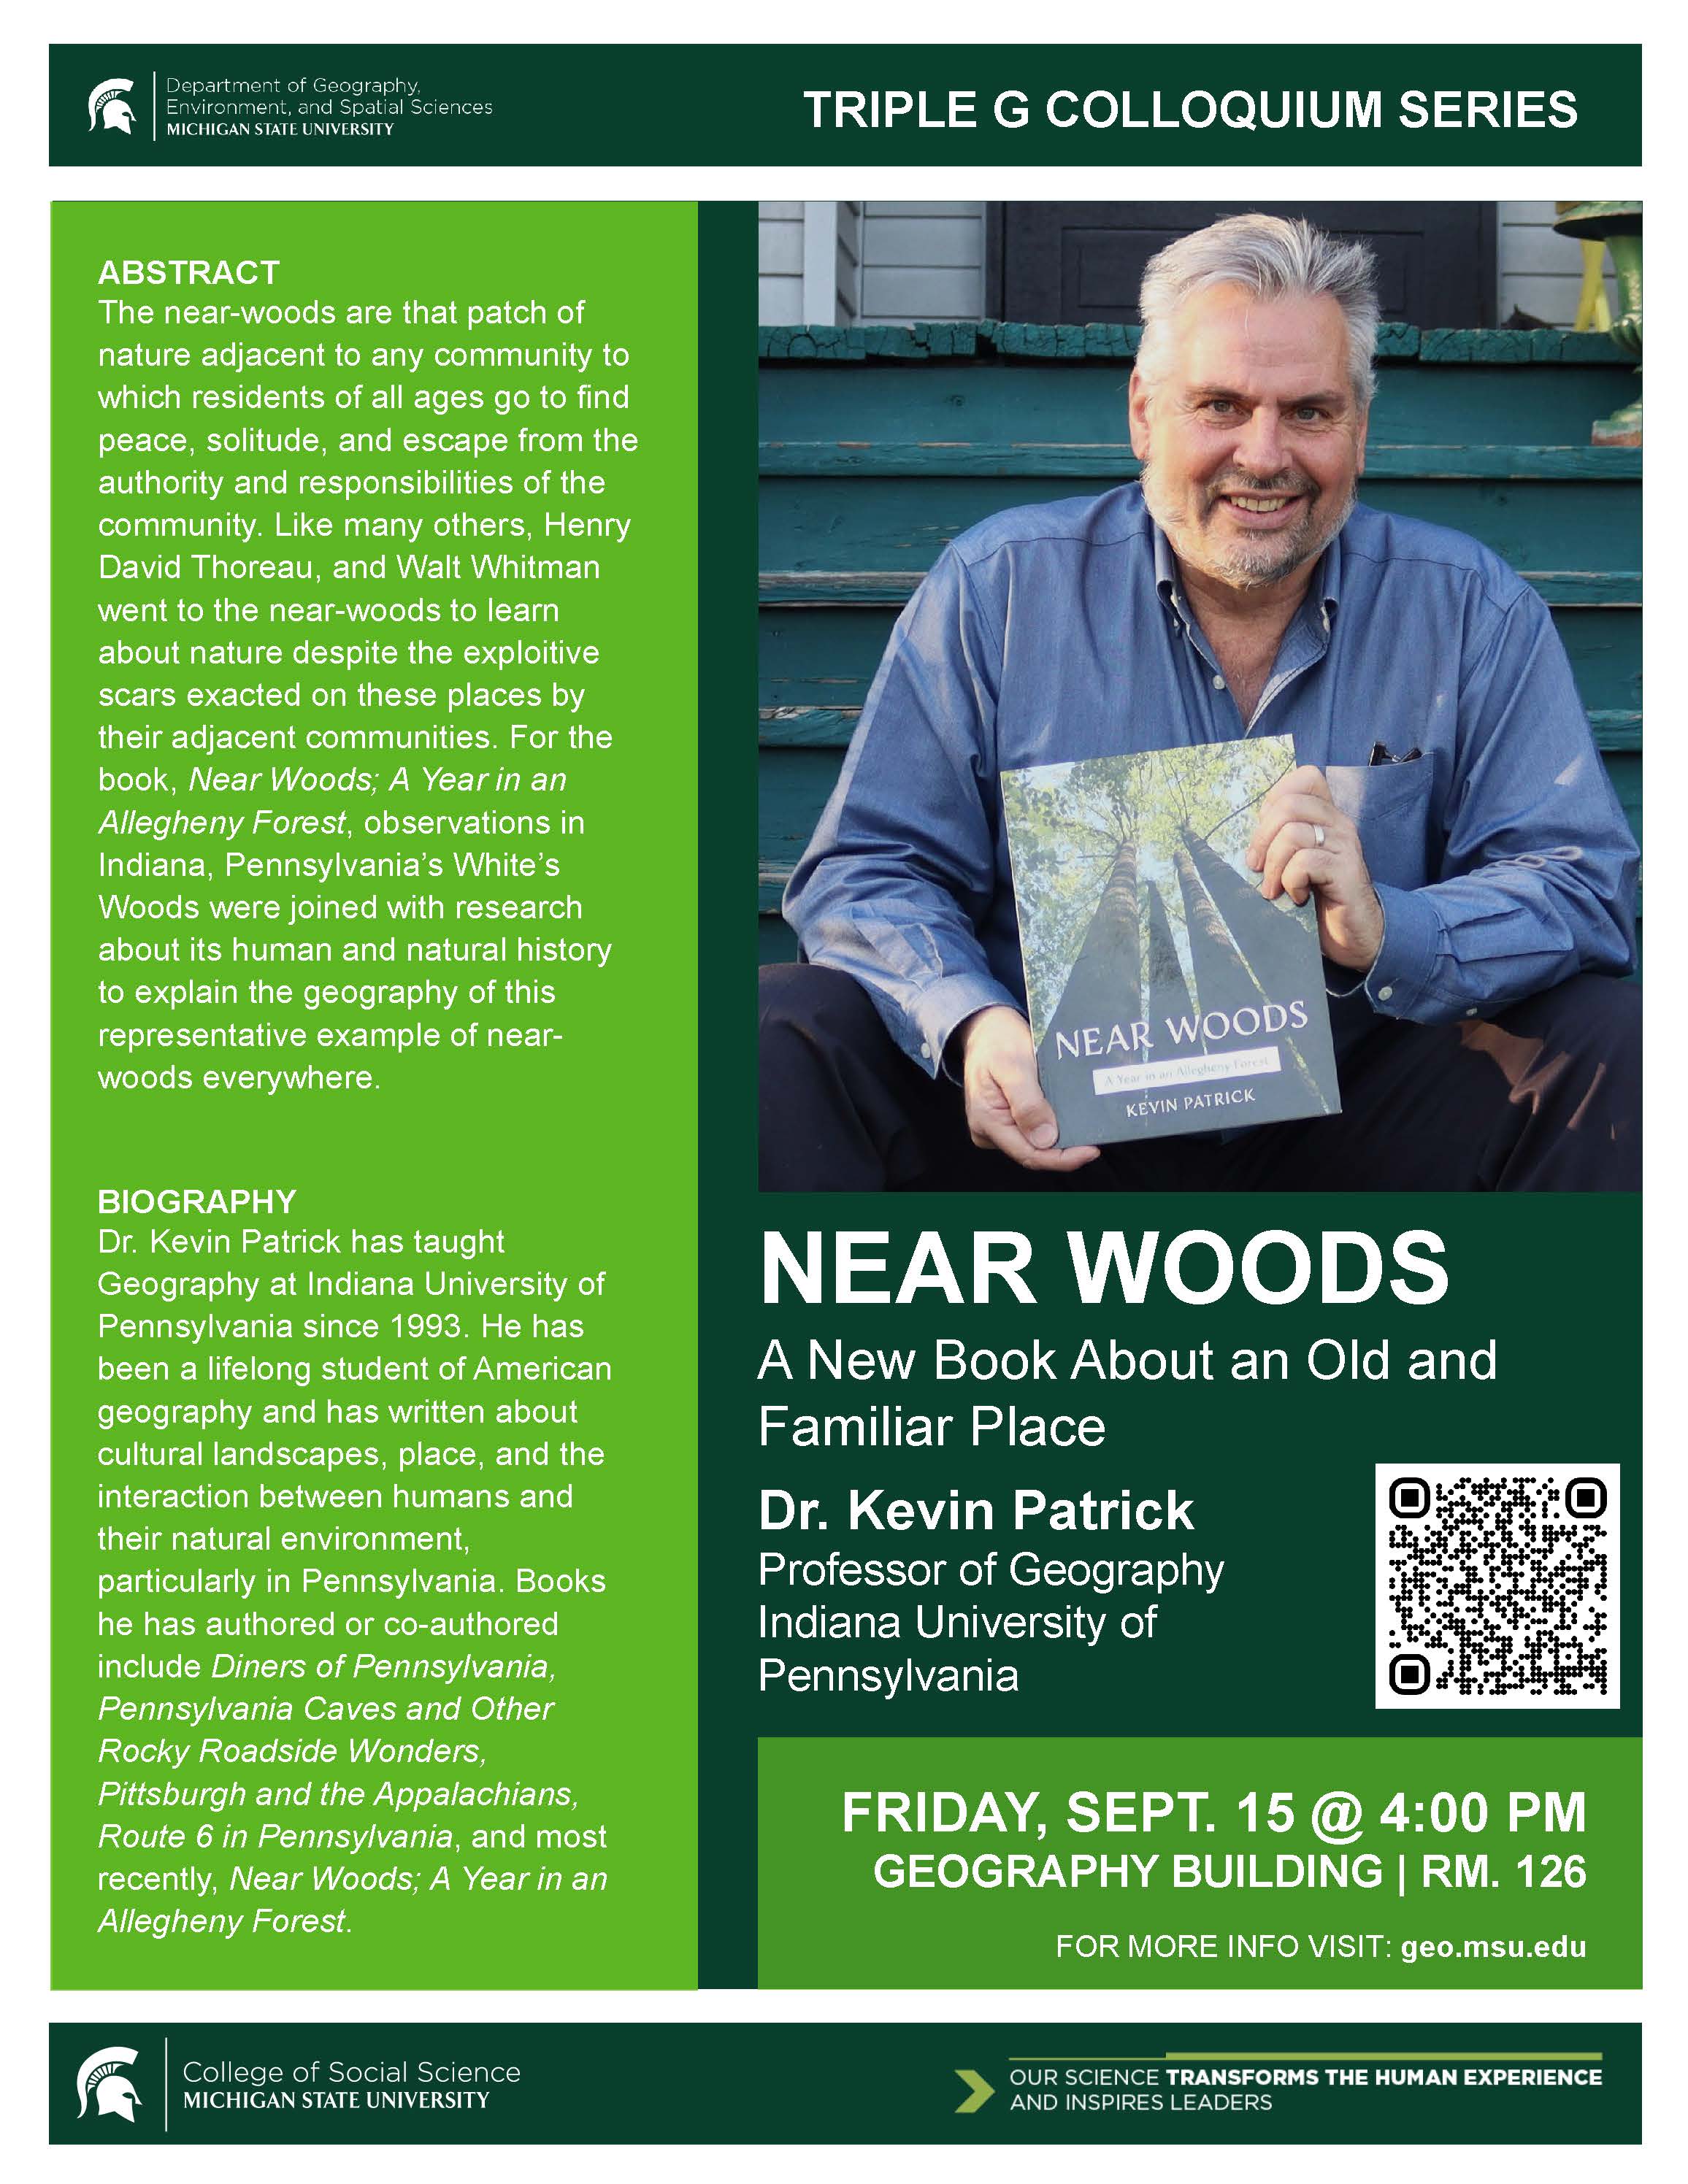 Triple G Colloquium Flyer for Kevin Patrick